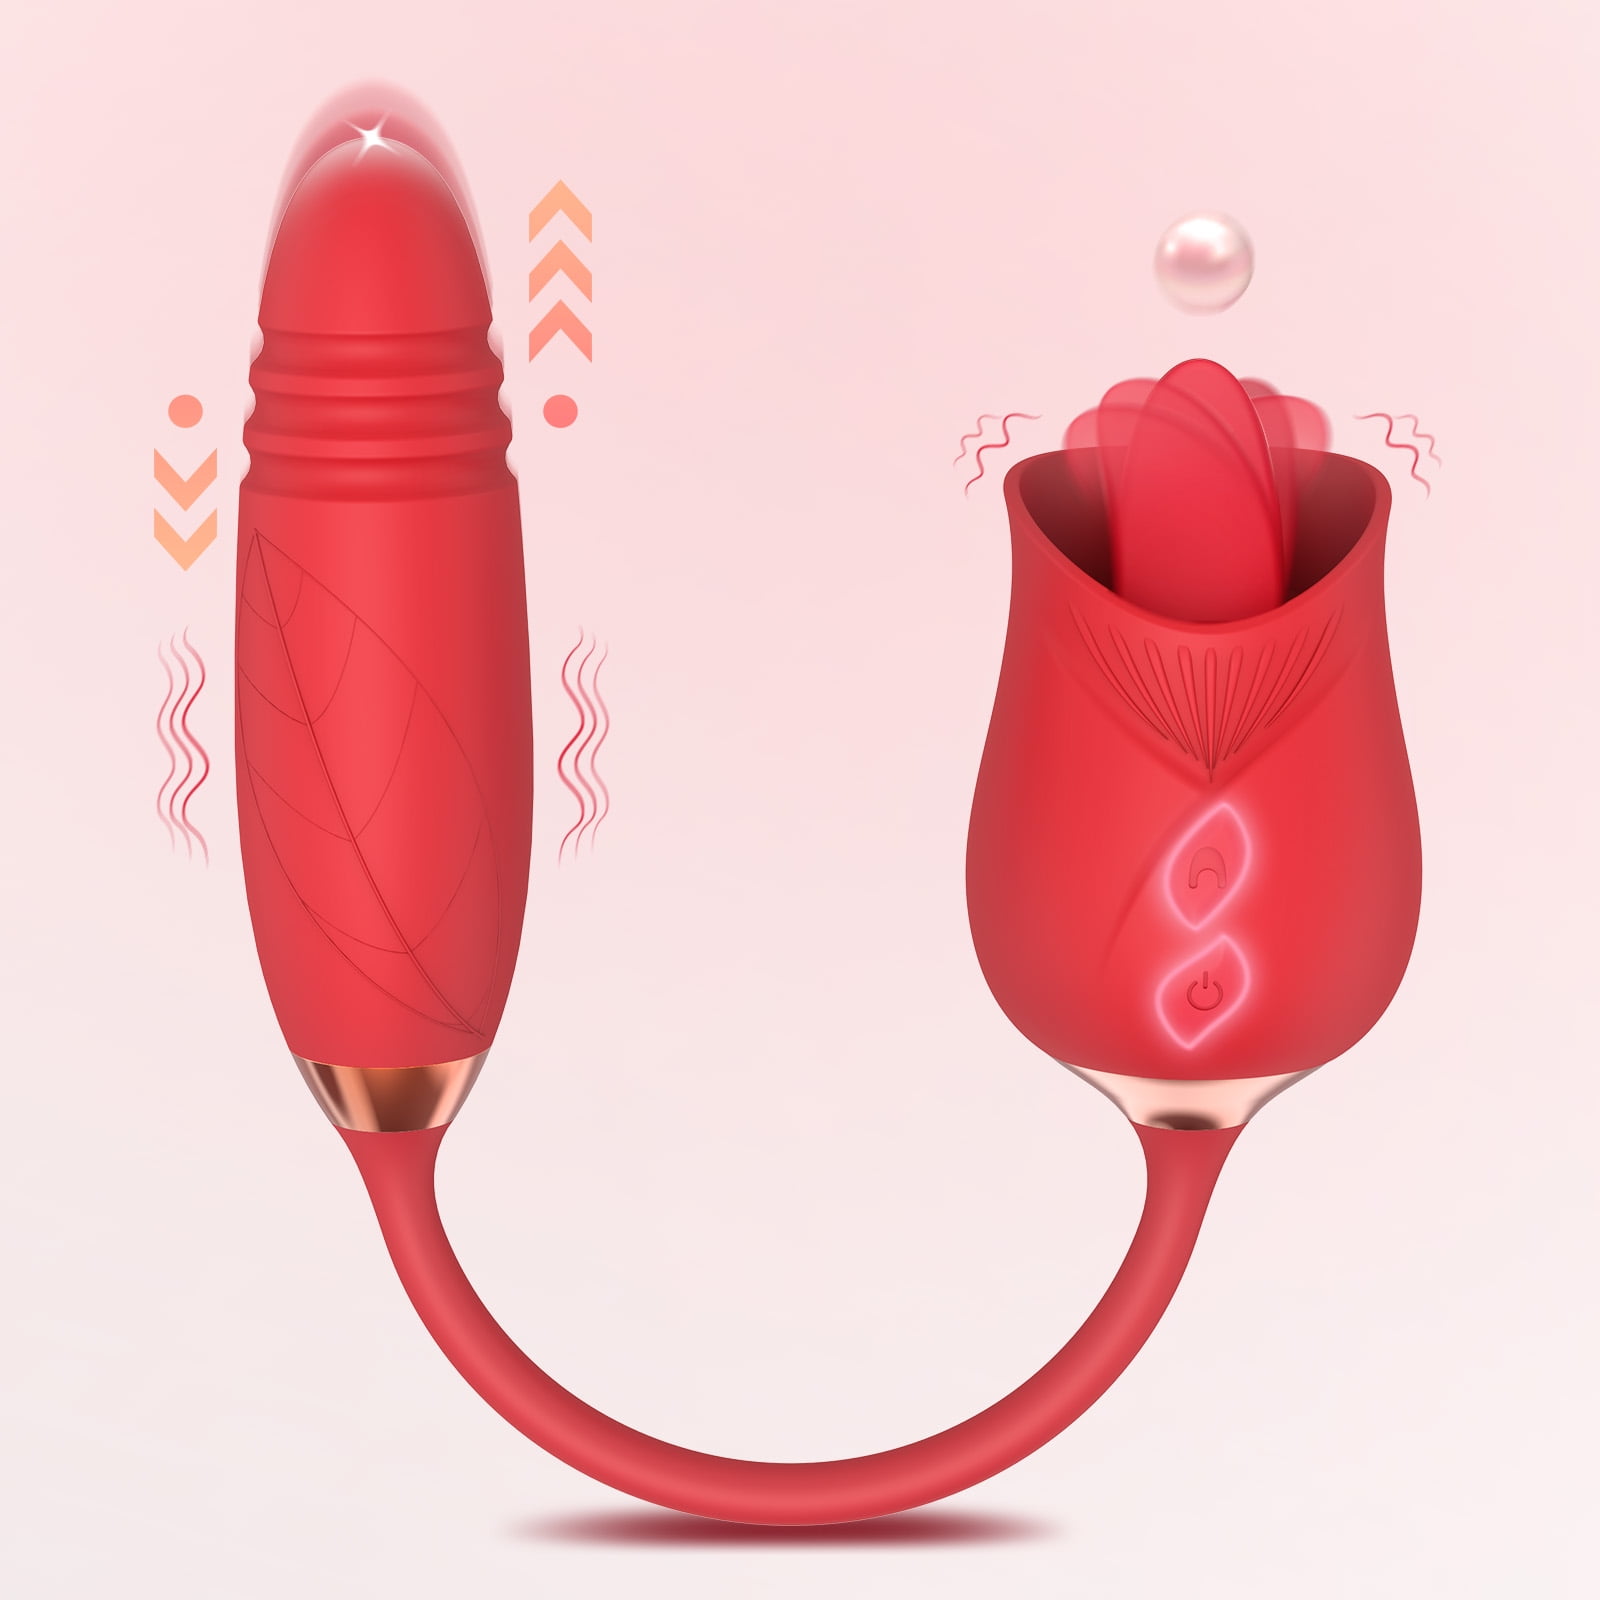 Rose Sex Toys for Women - 2 in 1 Adult Rose Sex Stimulator Vibrator Dildo for Nipple G Spot, Butt Plug for Woman Couples Pleasure(Red) photo